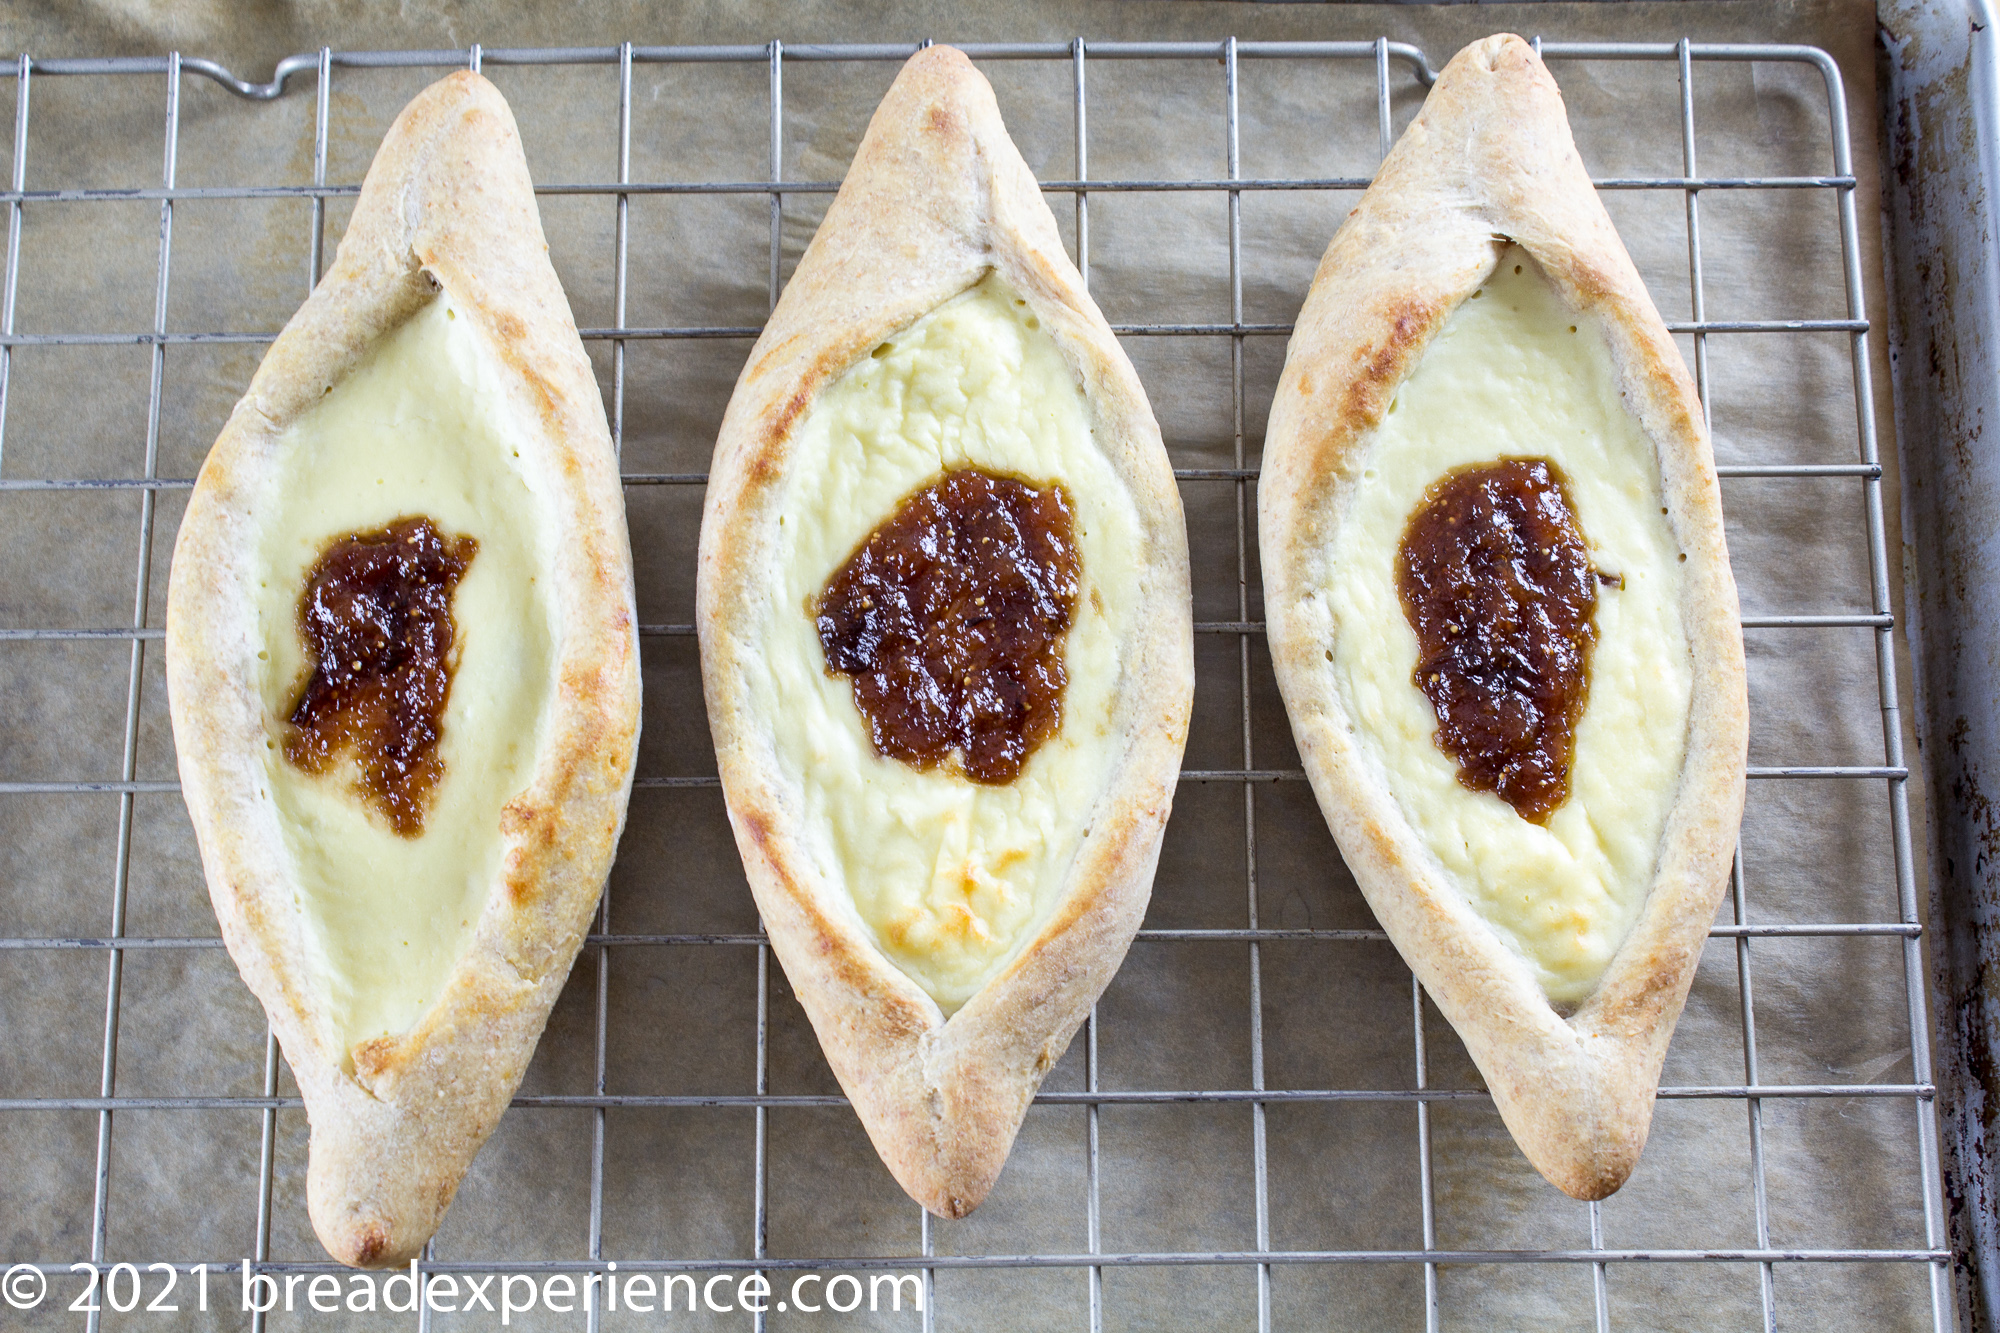 Ekmak with cheese filling and topped with fig jam